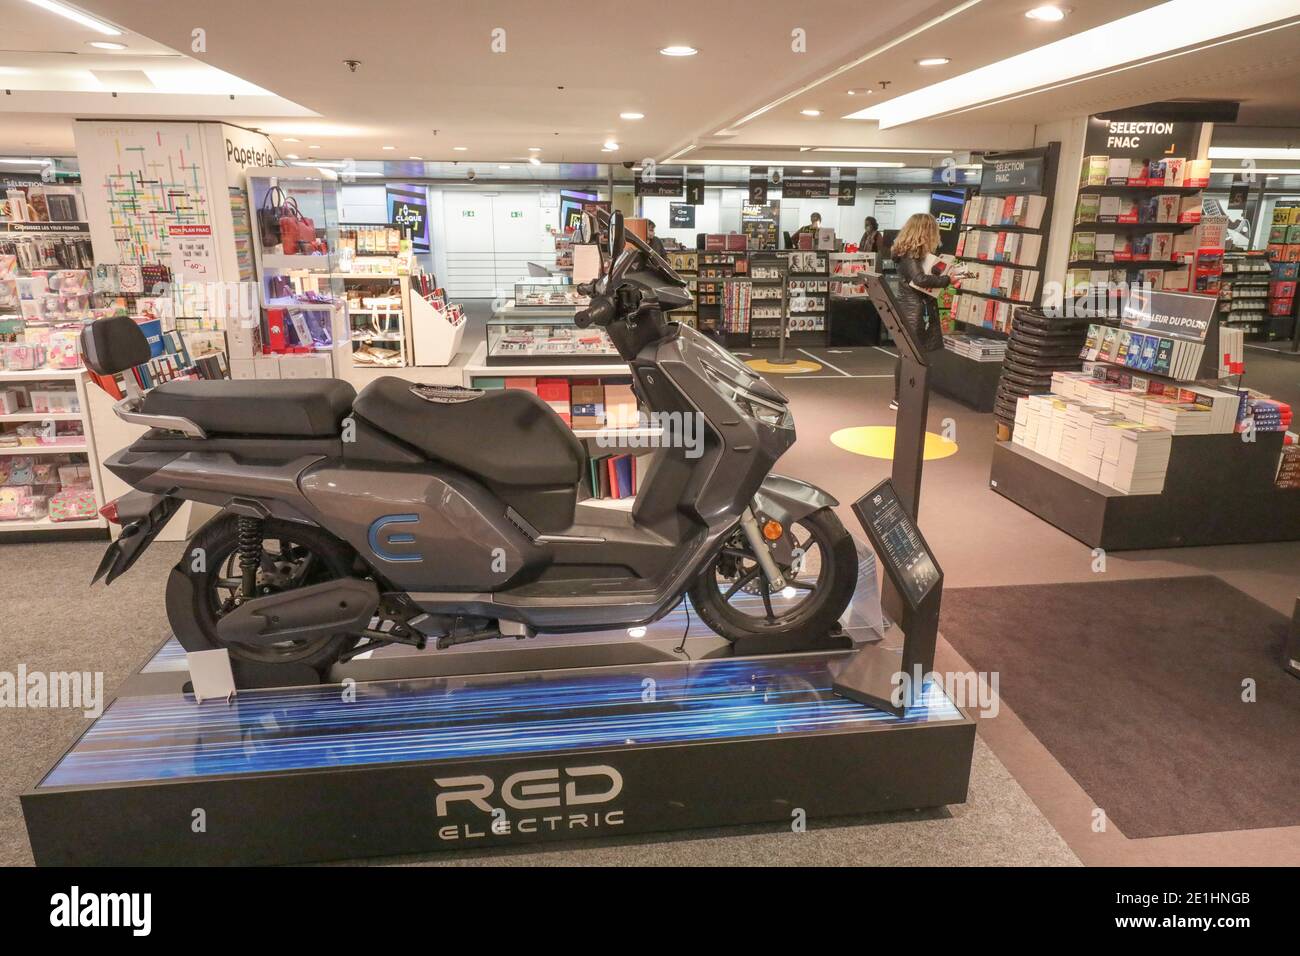 FNAC DARTY GROUP IS LAUCHING RED ELECTRIC SCOOTERS Stock Photo - Alamy